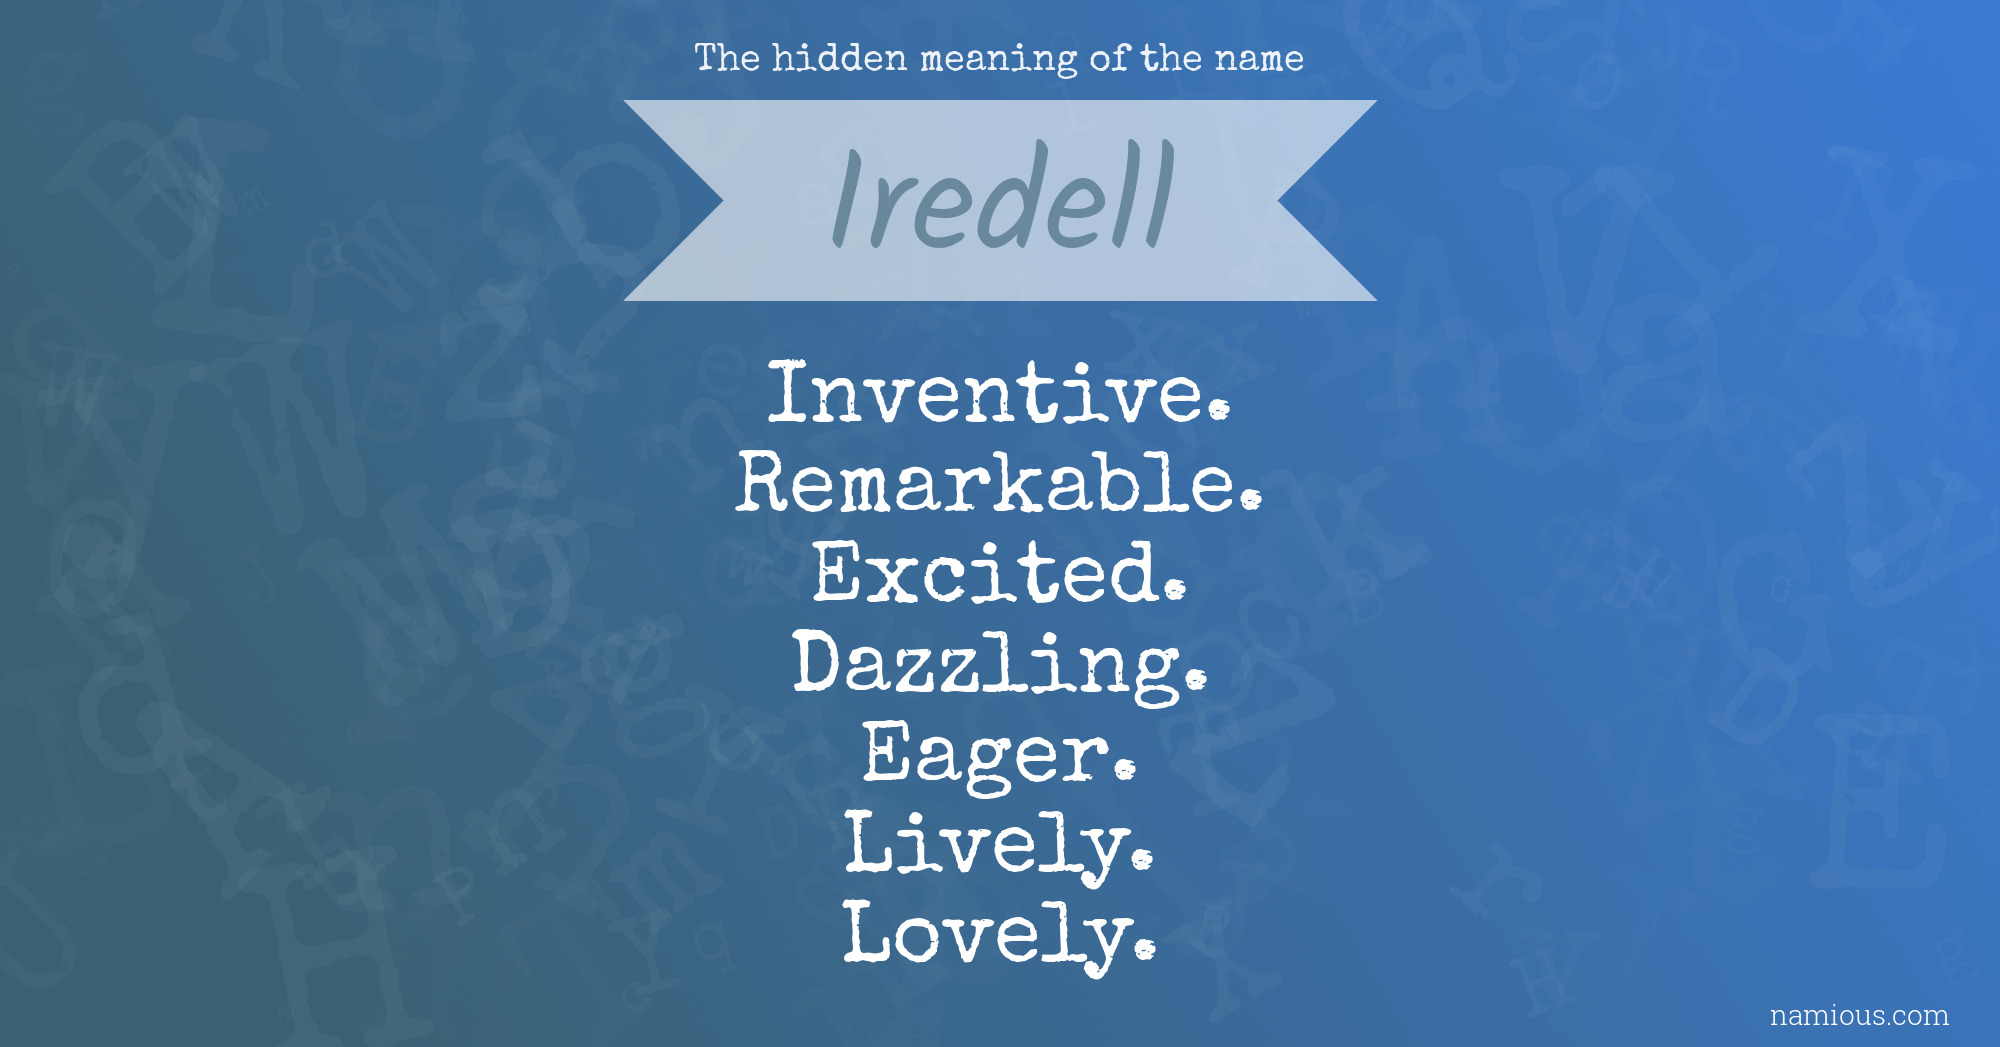 The hidden meaning of the name Iredell